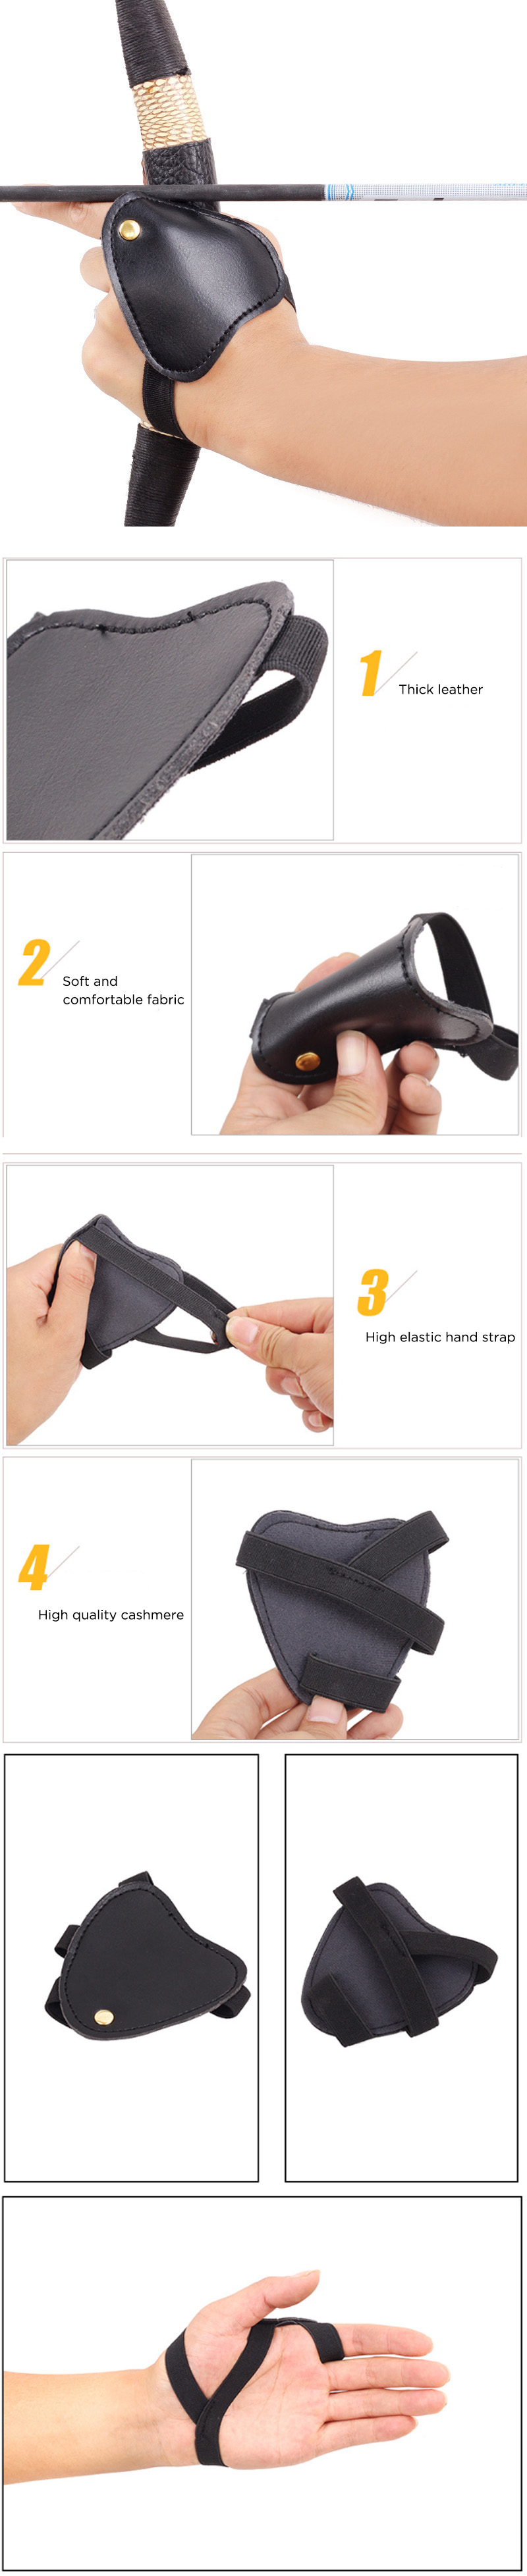 SPG-Archery-Finger-Glove-Finger-Protector-Safety-Archery-Hunting-Leather-Finger-Protection-1597663-1